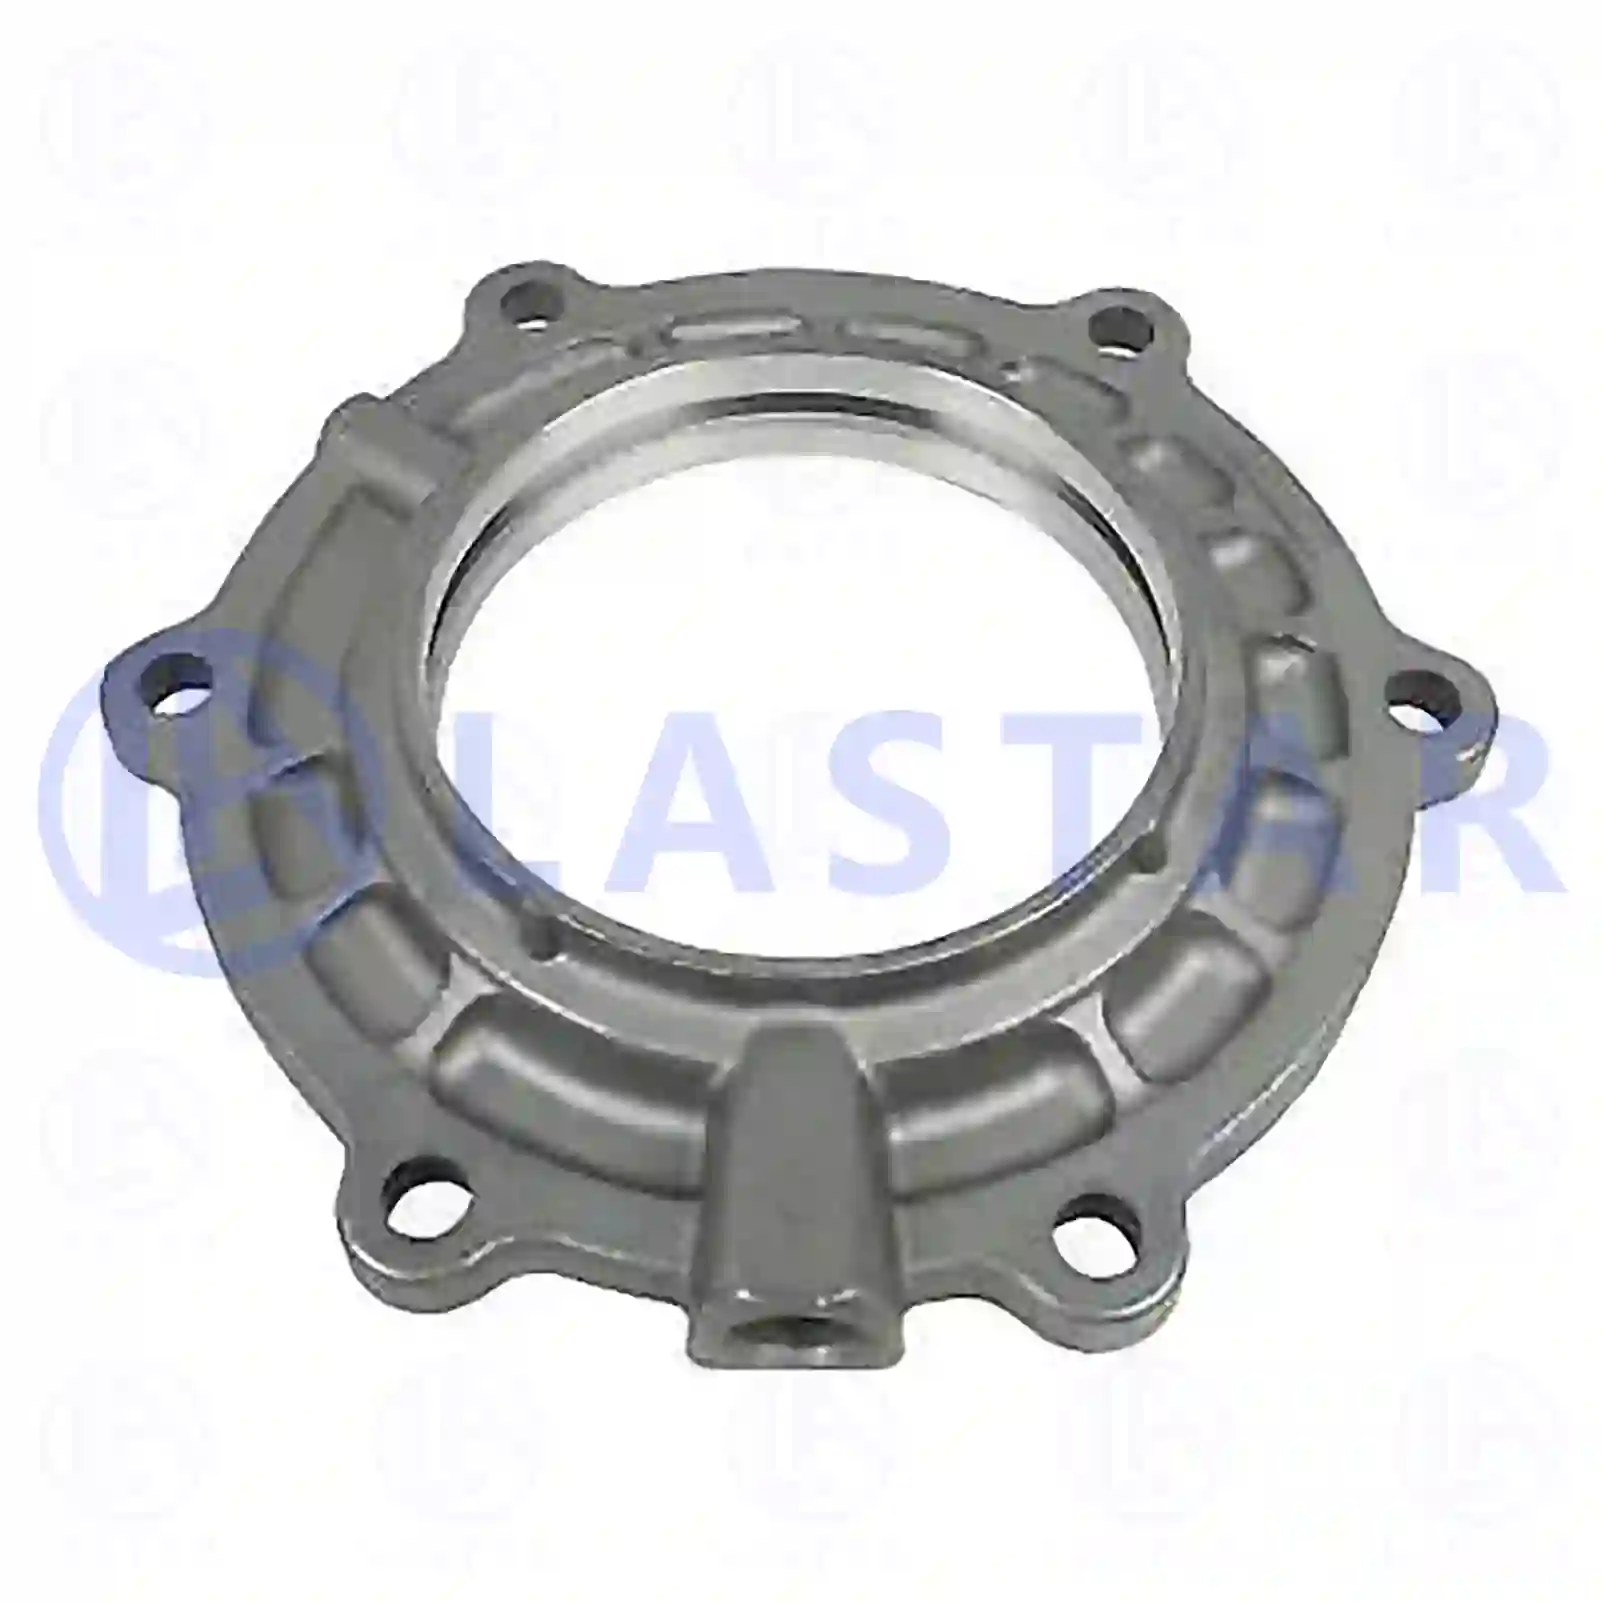 Cover, gearbox housing, 77732231, 7401521841, 15218 ||  77732231 Lastar Spare Part | Truck Spare Parts, Auotomotive Spare Parts Cover, gearbox housing, 77732231, 7401521841, 15218 ||  77732231 Lastar Spare Part | Truck Spare Parts, Auotomotive Spare Parts